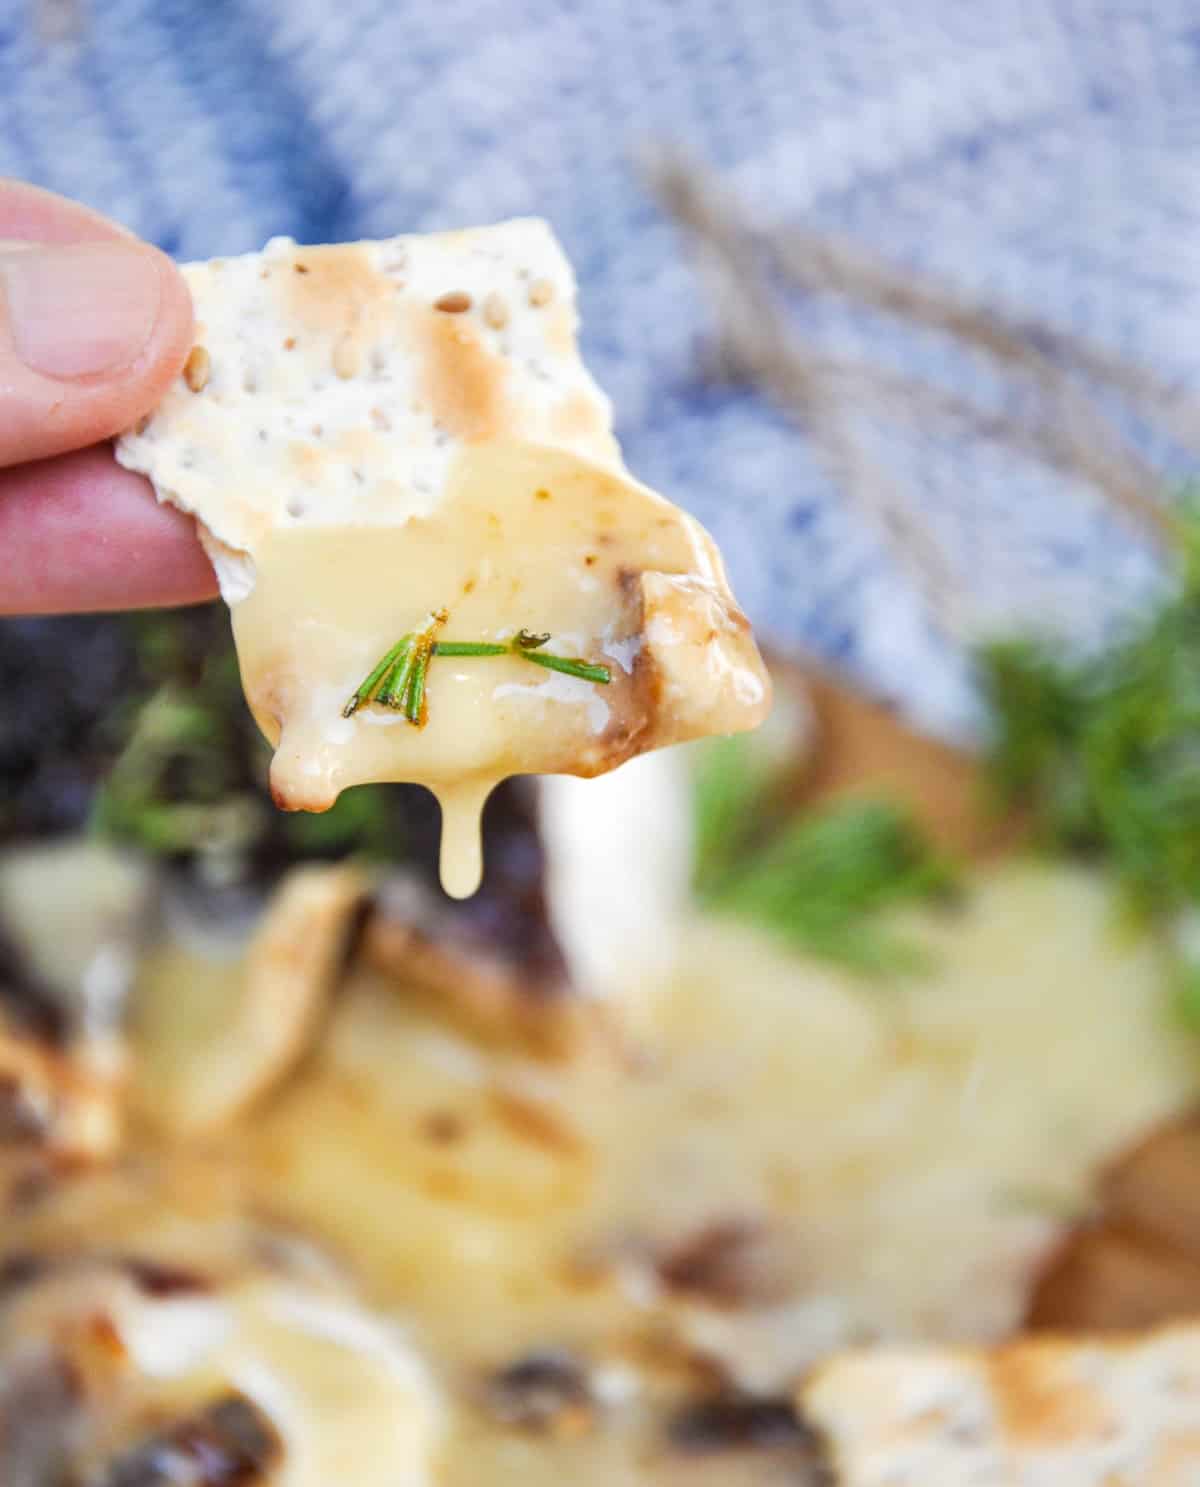 Brie on a cracker